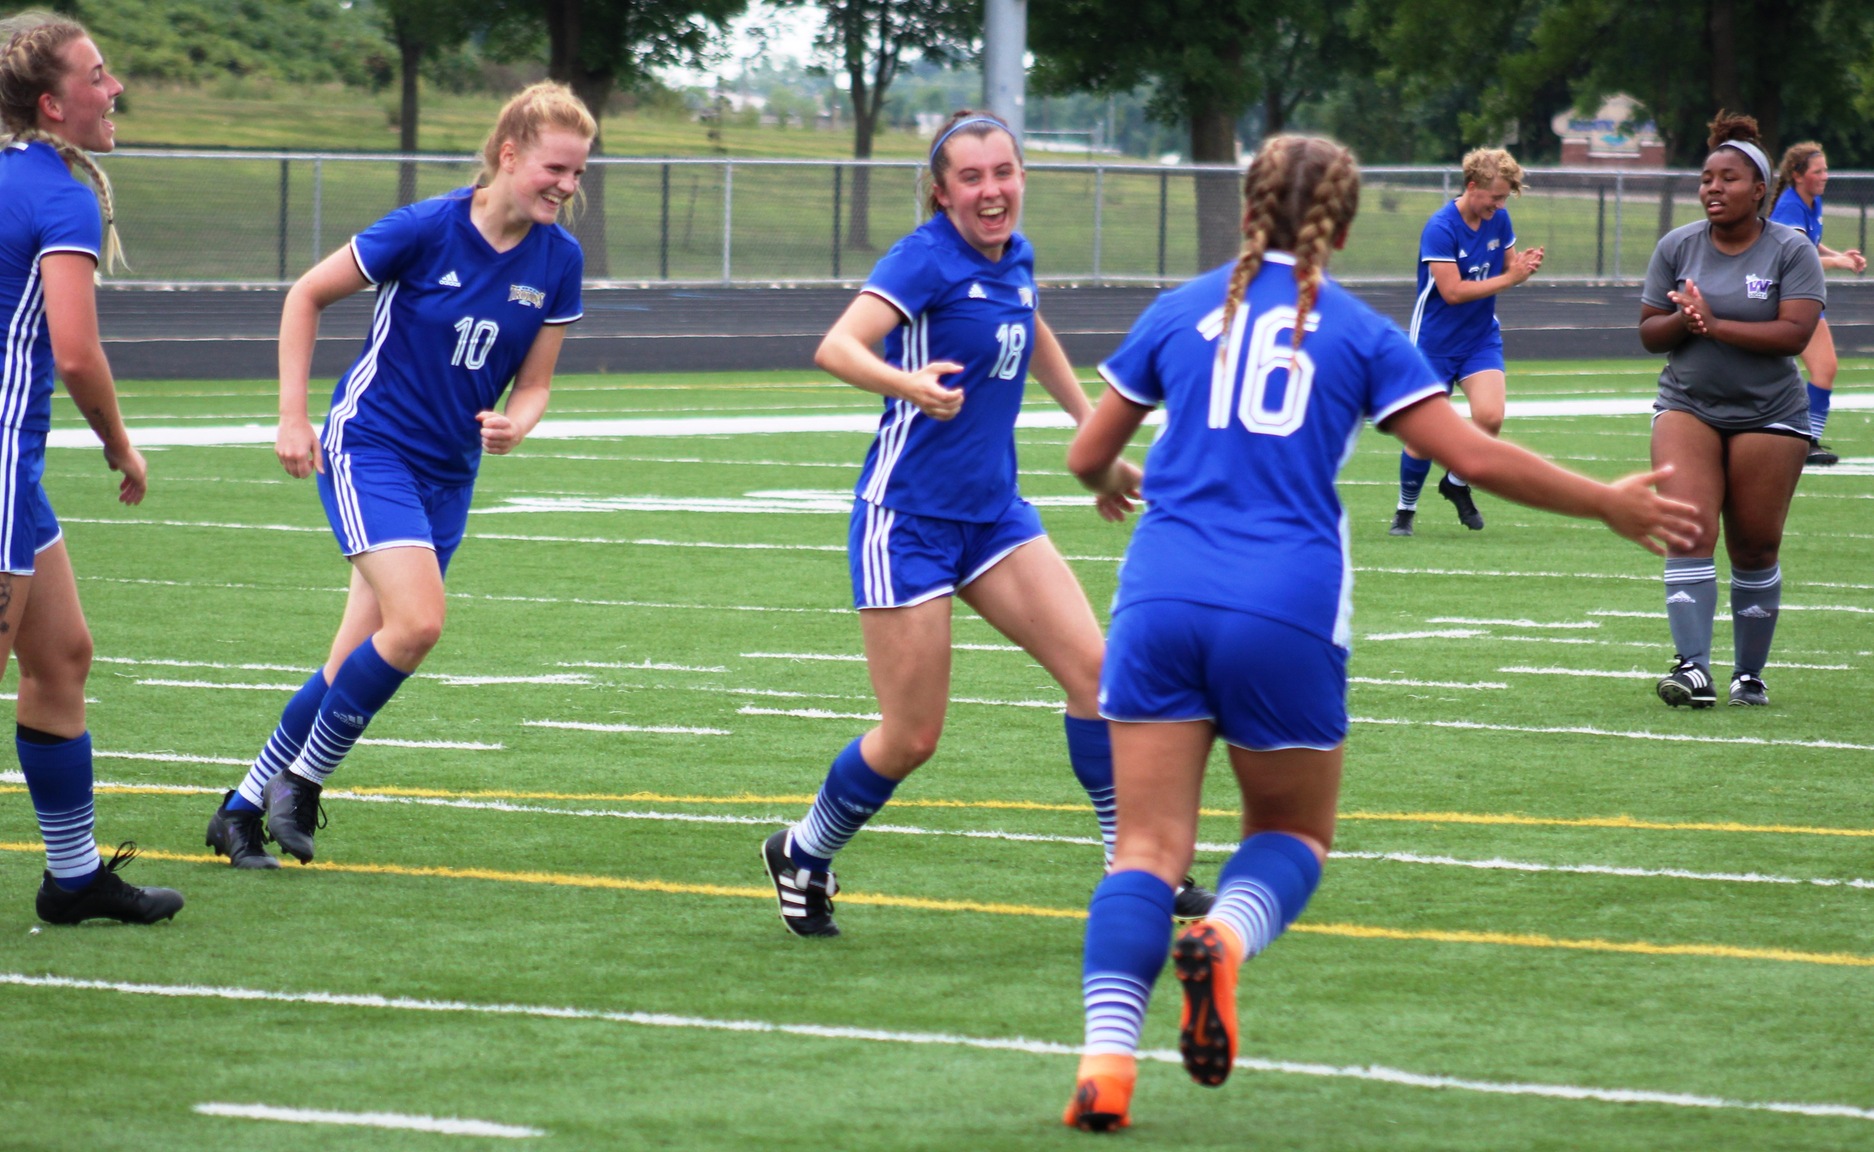 NIACC celebrates a goal scored by Milly Jay (18) during Wednesday's scrimmage against Waldorf University.